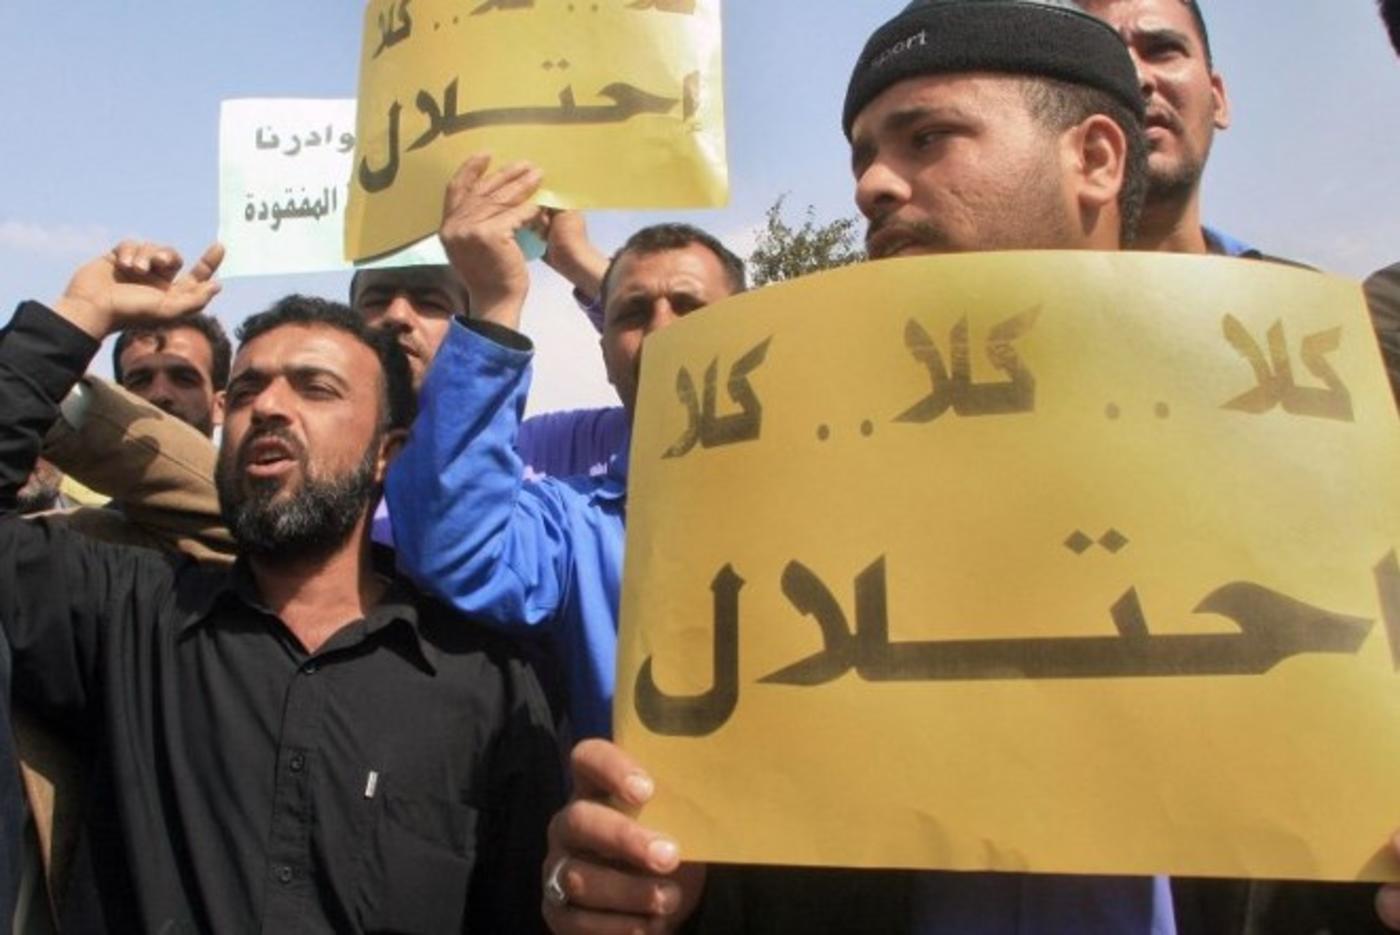 Employees of the southern Basra province energy company carry placards that read "no for occupation" and shout slogans during a demonstration in front of the British consulate in Basra, 2007 (AFP)